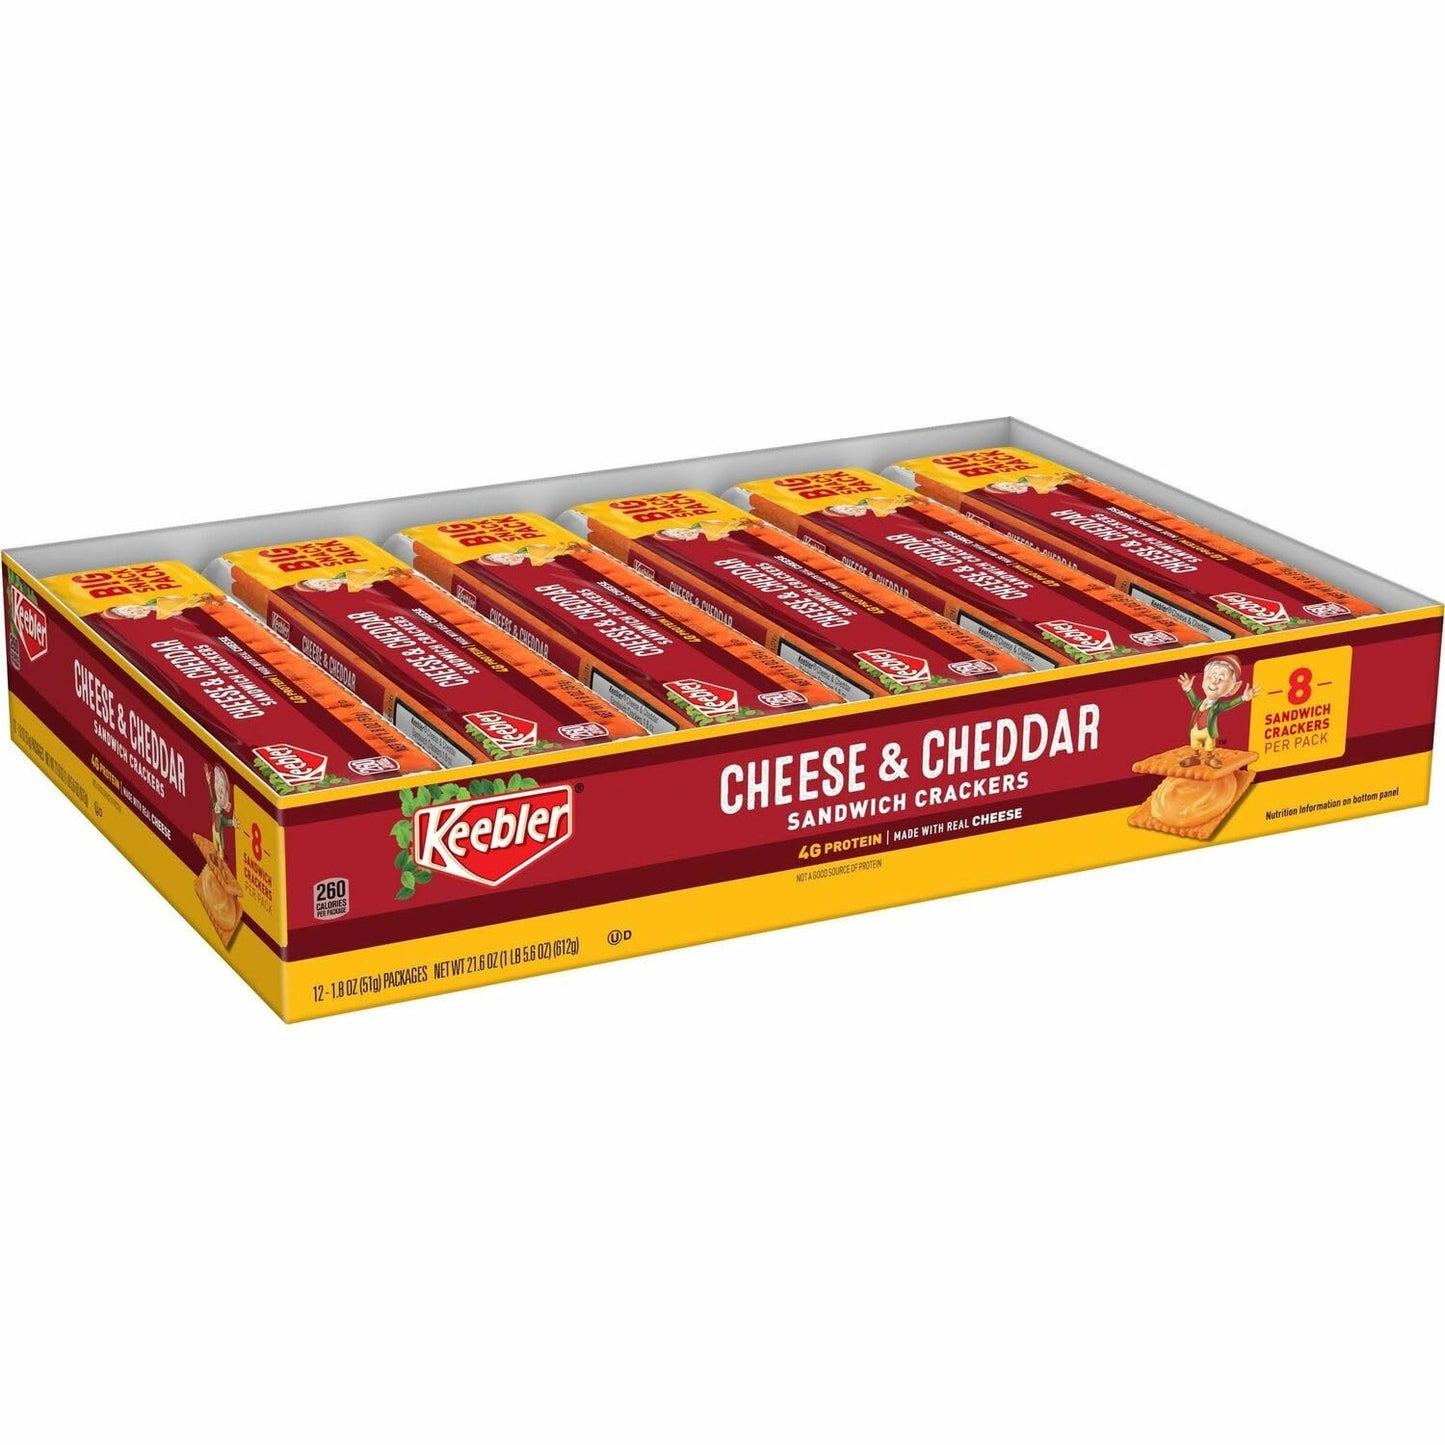 Keebler Cheese & Cheddar Sandwich Crackers 1.8oz (Pack of 12)